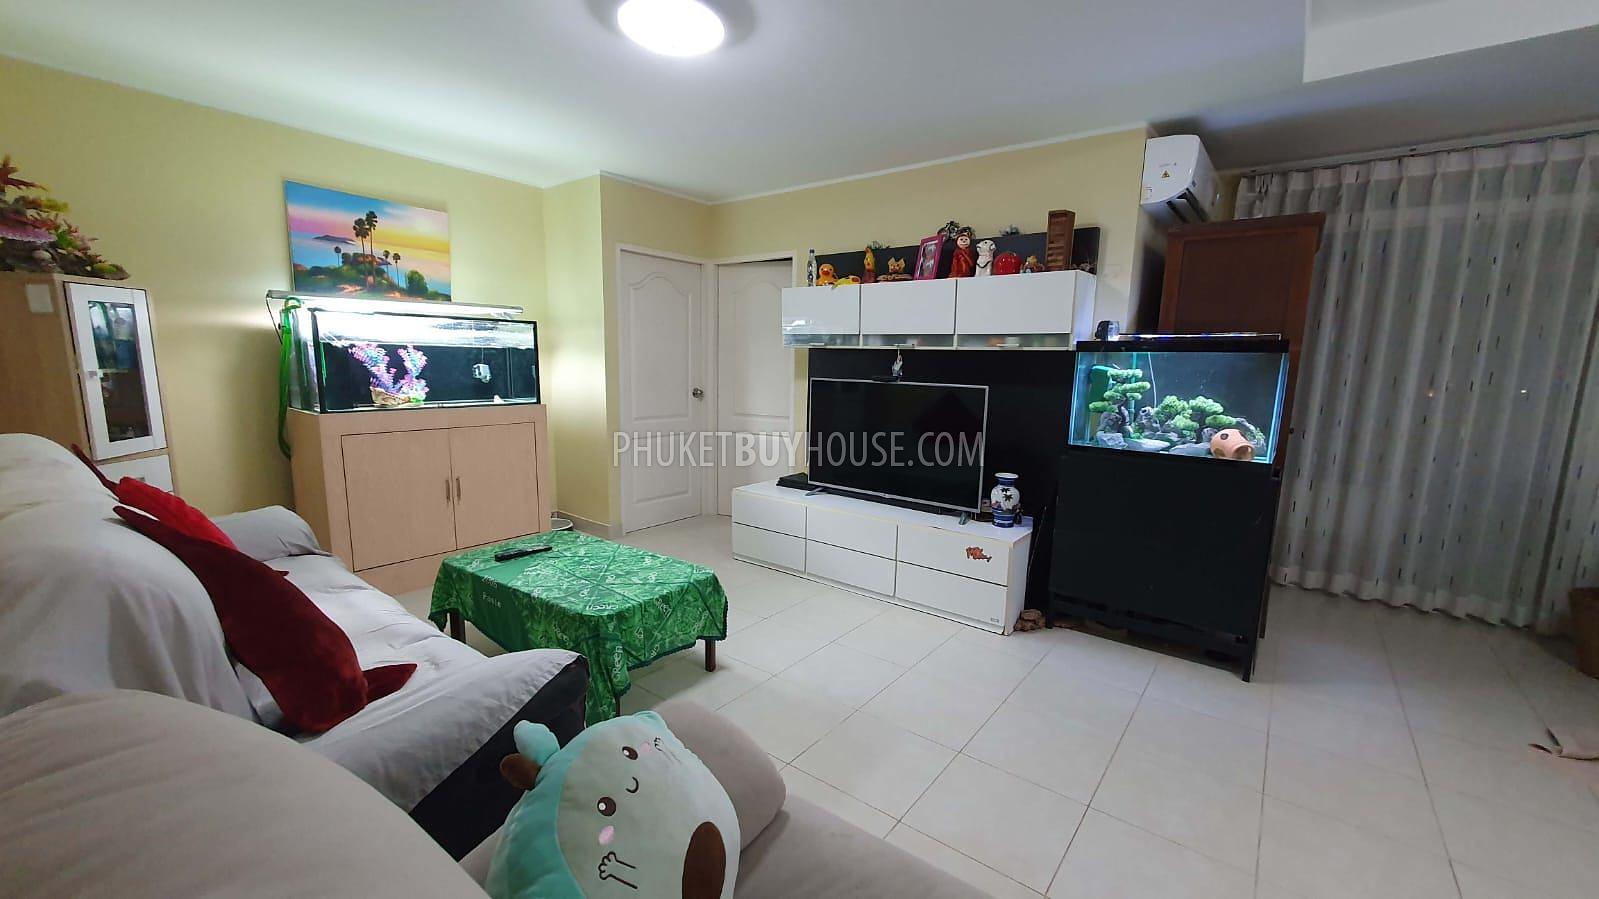 PAT21714: Two Bedroom Freehold Apartment in Patong. Photo #11